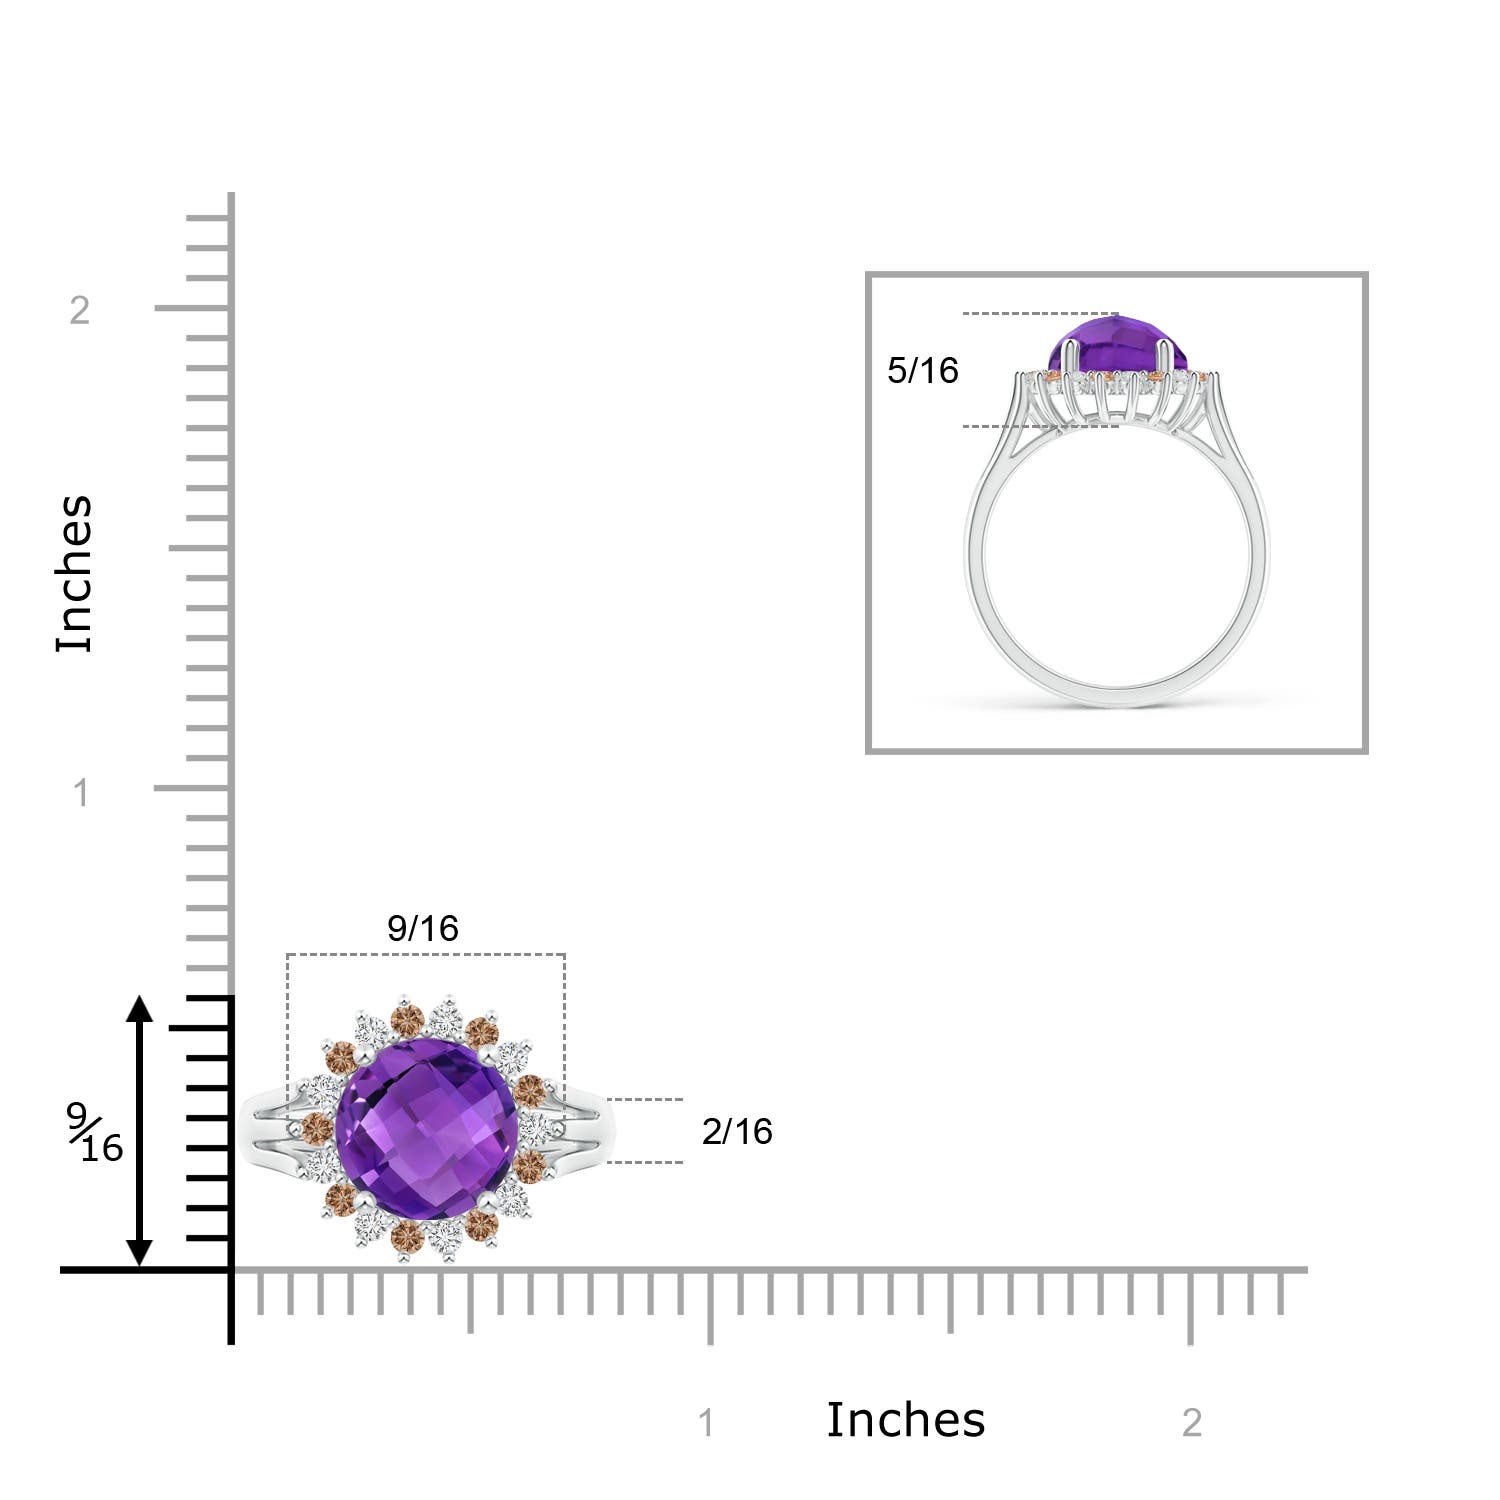 AAA - Amethyst / 4.17 CT / 14 KT White Gold